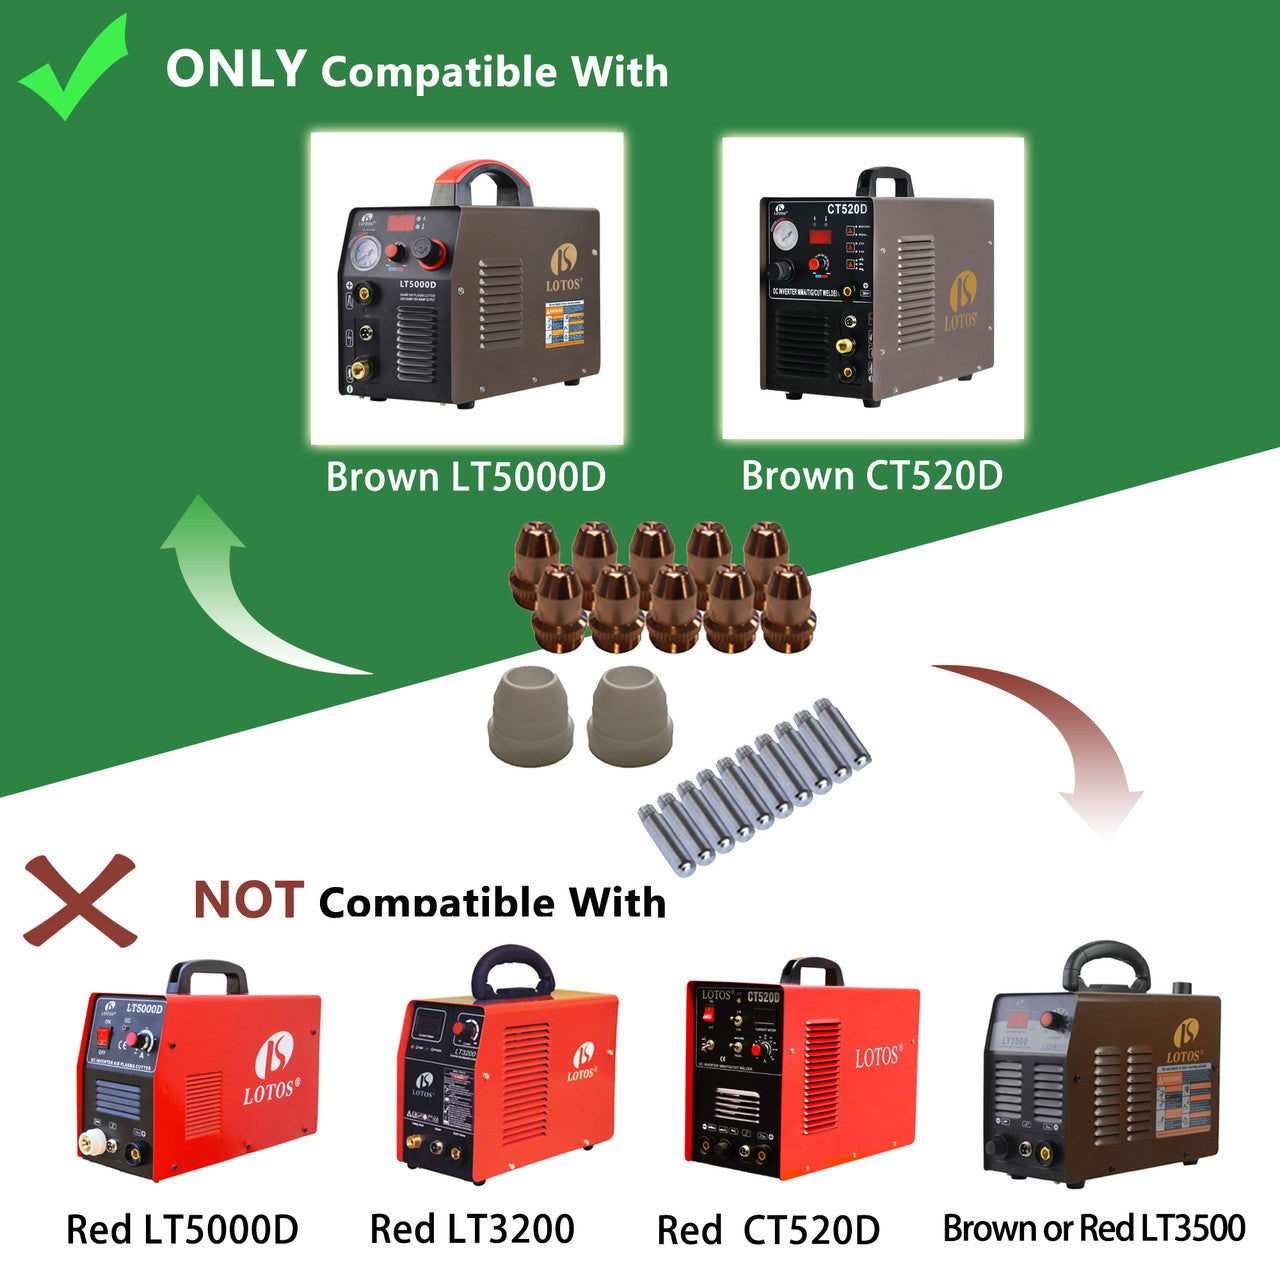 LOTOS LCS77 PLASMA CUTTER CONSUMABLES SETS FOR BROWN LT5000D AND BROWN CT520D (77) - LOTOS Plasma Cutters & Welders